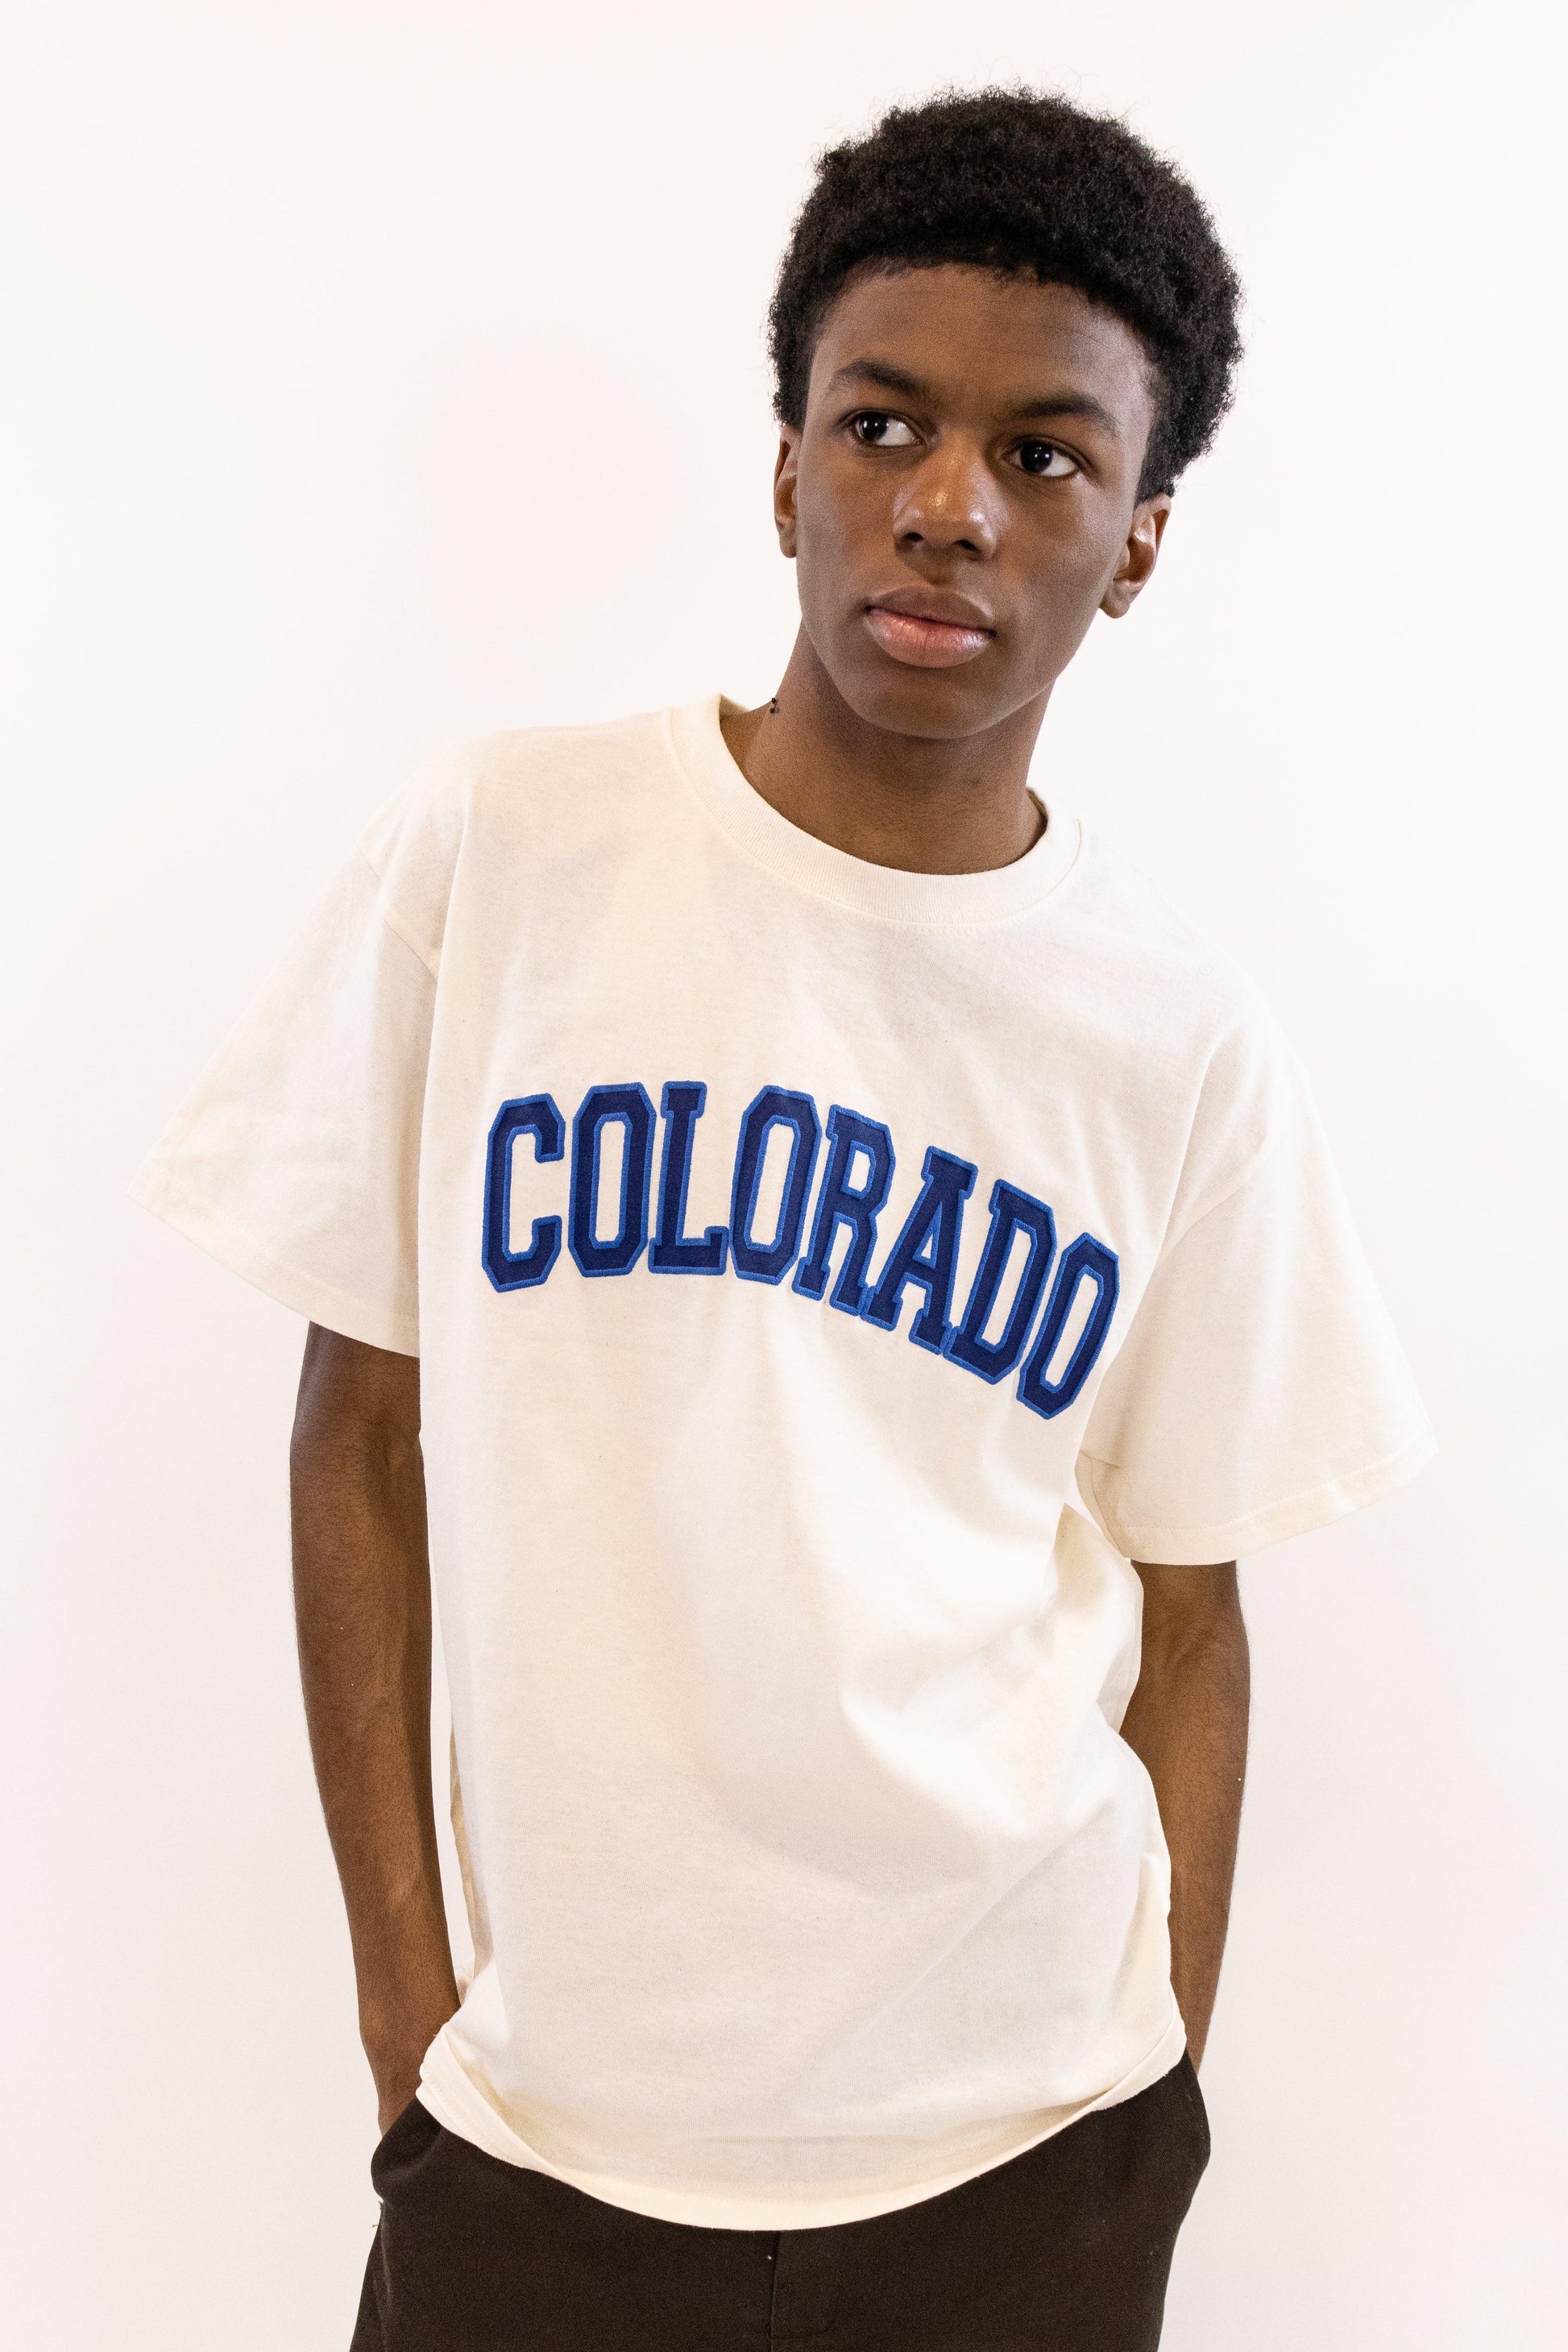 Embroidered Colorado Athletic Tee - Love From USA